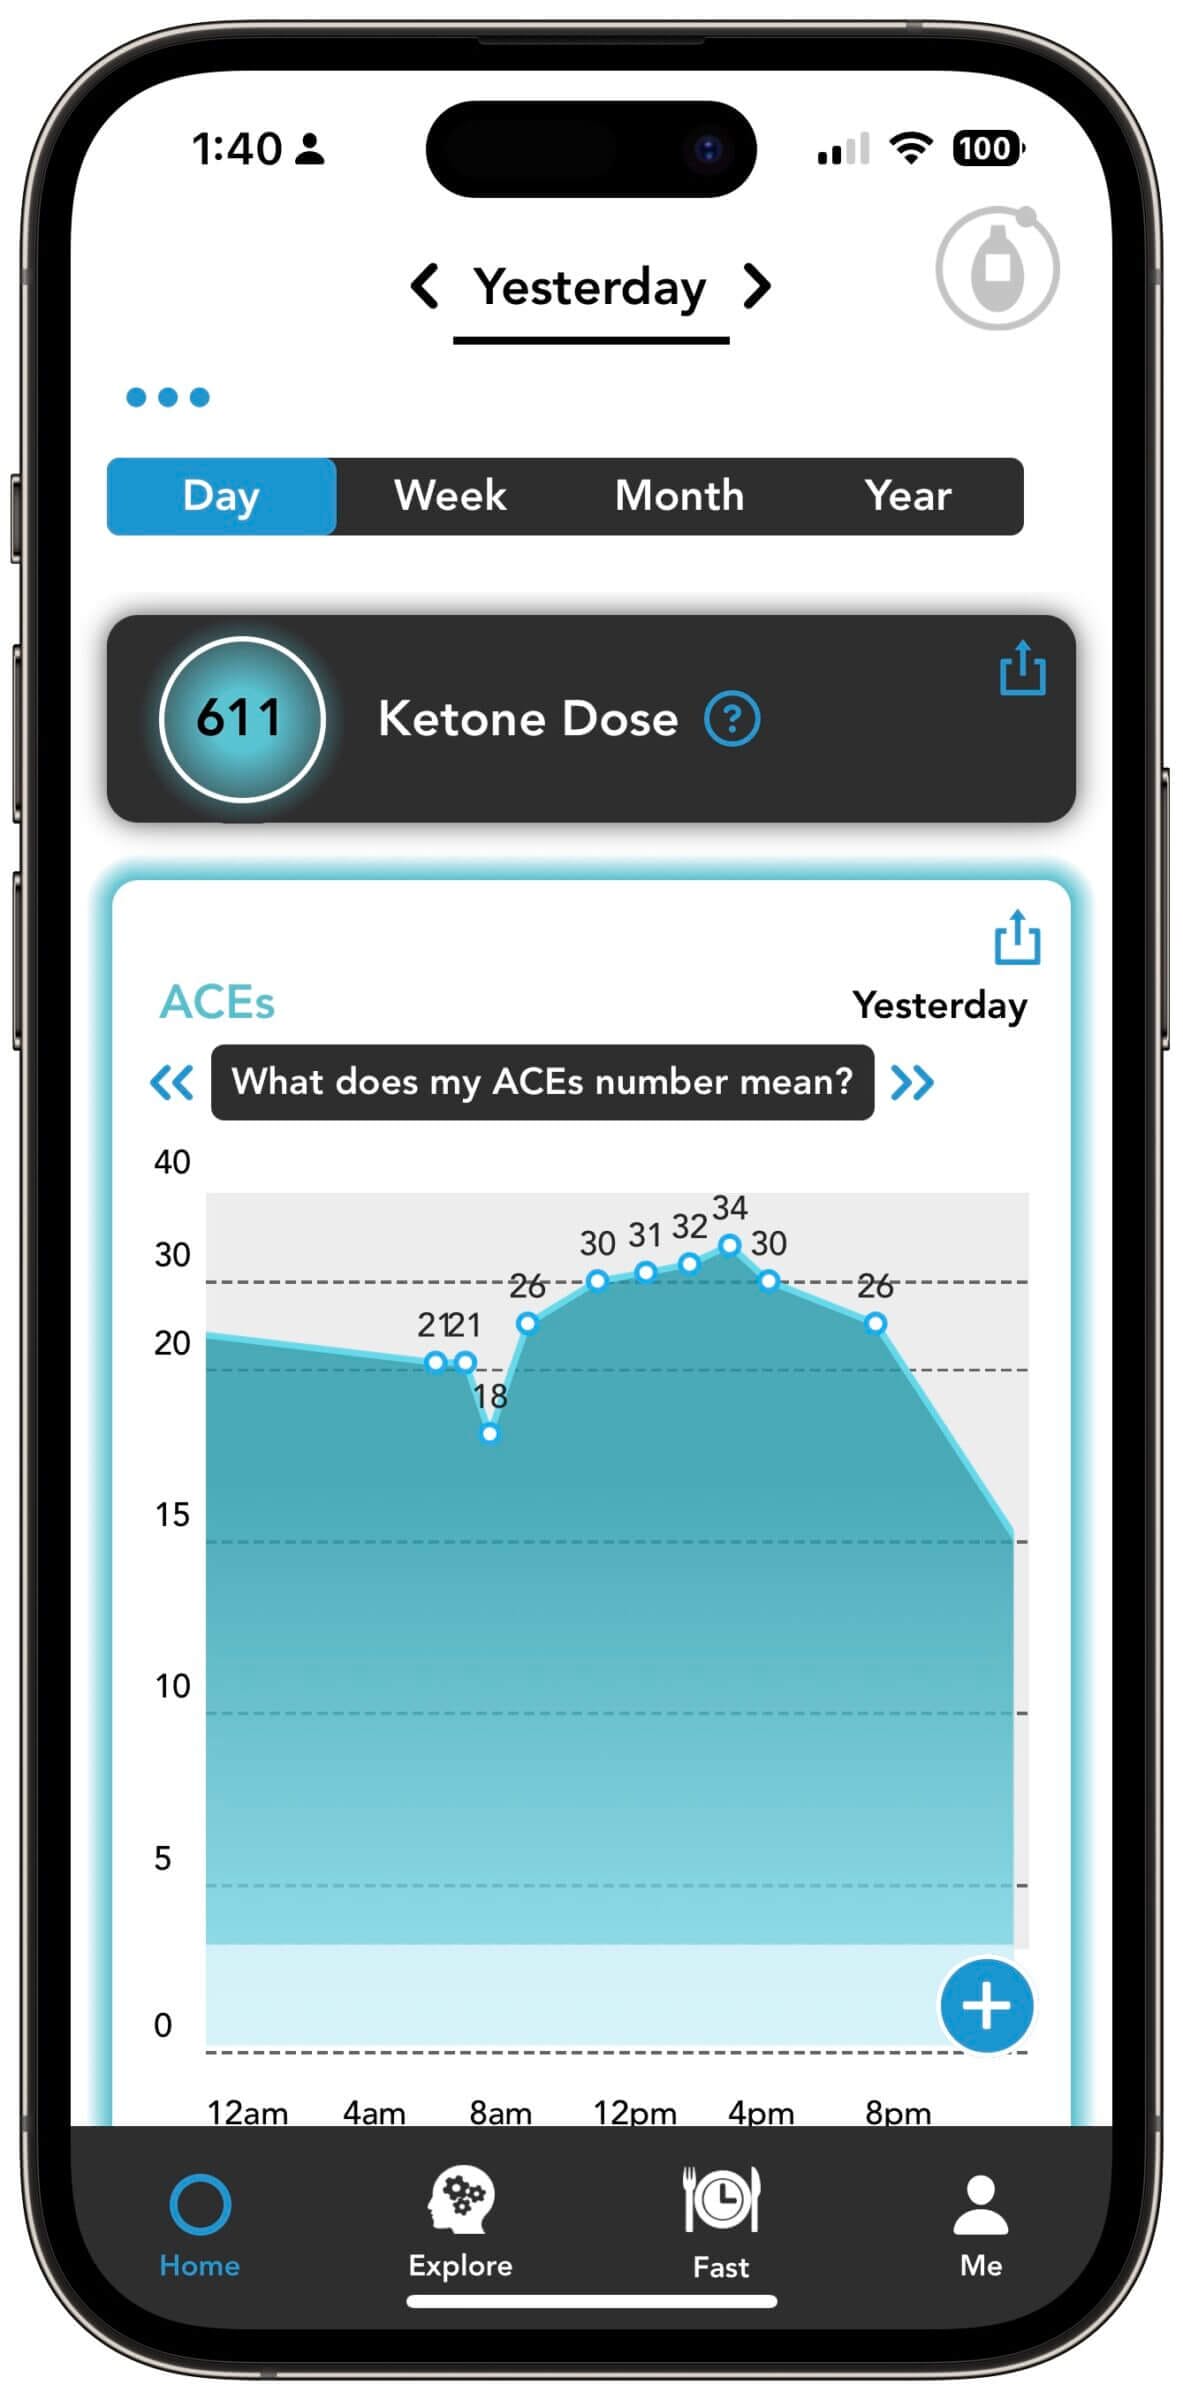 Consuming DeltaG Ketones Performance dramatically increased my ketone levels